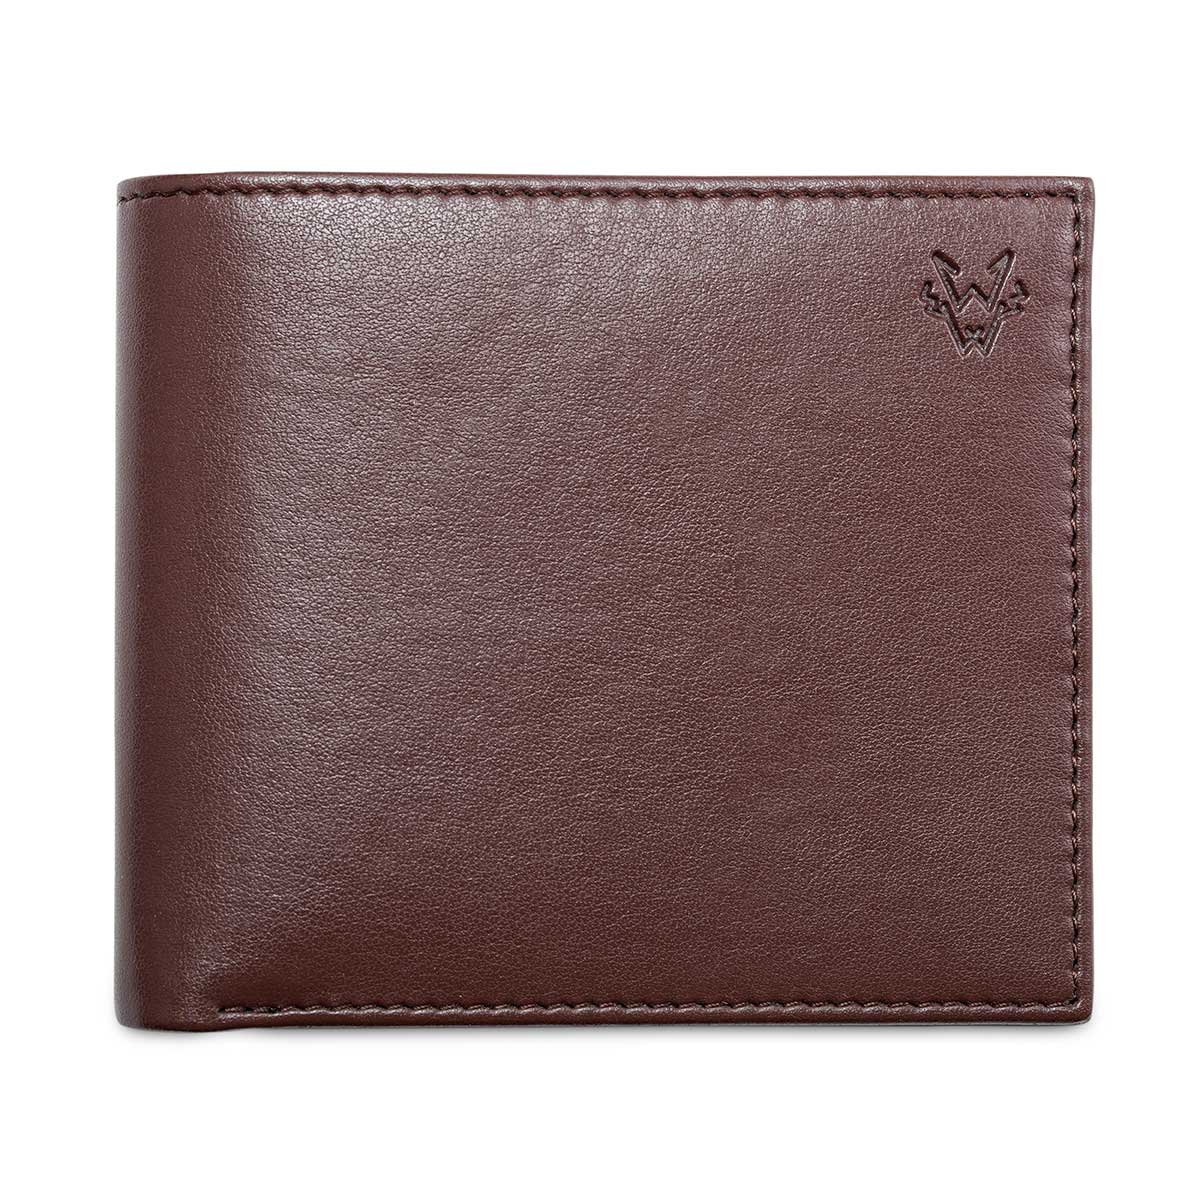 Bifold Vegan Corn Leather Wallet with Coin Pocket - Chestnut with Cobalt